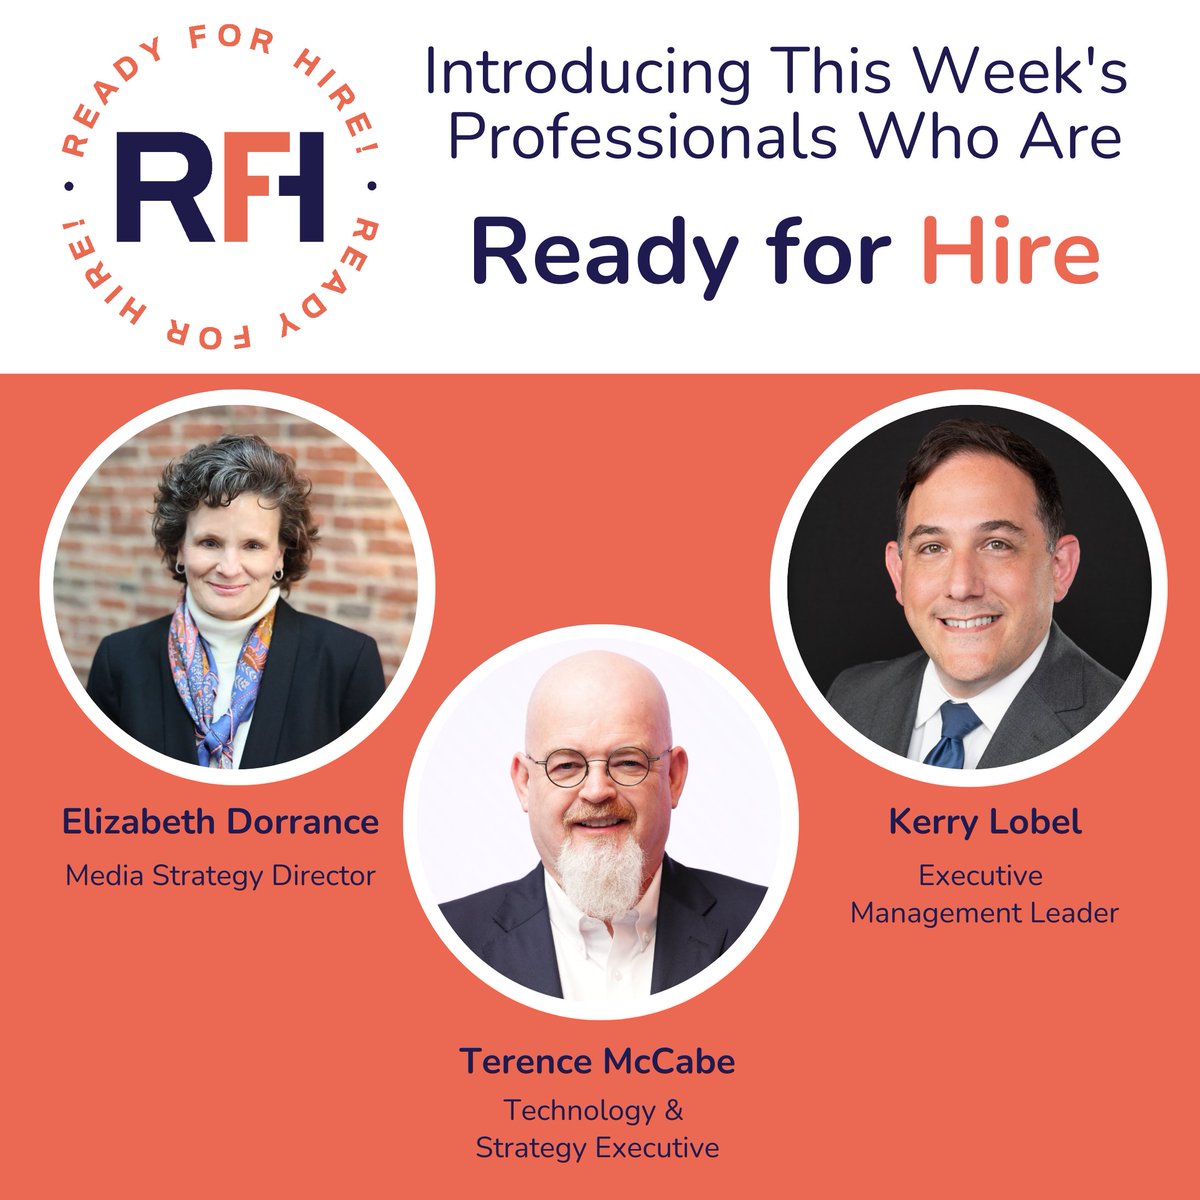 Seeking exceptional talent for your team? Discover our #ReadyForHire platform! Click the link to get started: bit.ly/3sFlmpx #MediaStrategy #TechLeadership #ExecutiveLeadership #ProfessionalHiring #ECPCareers